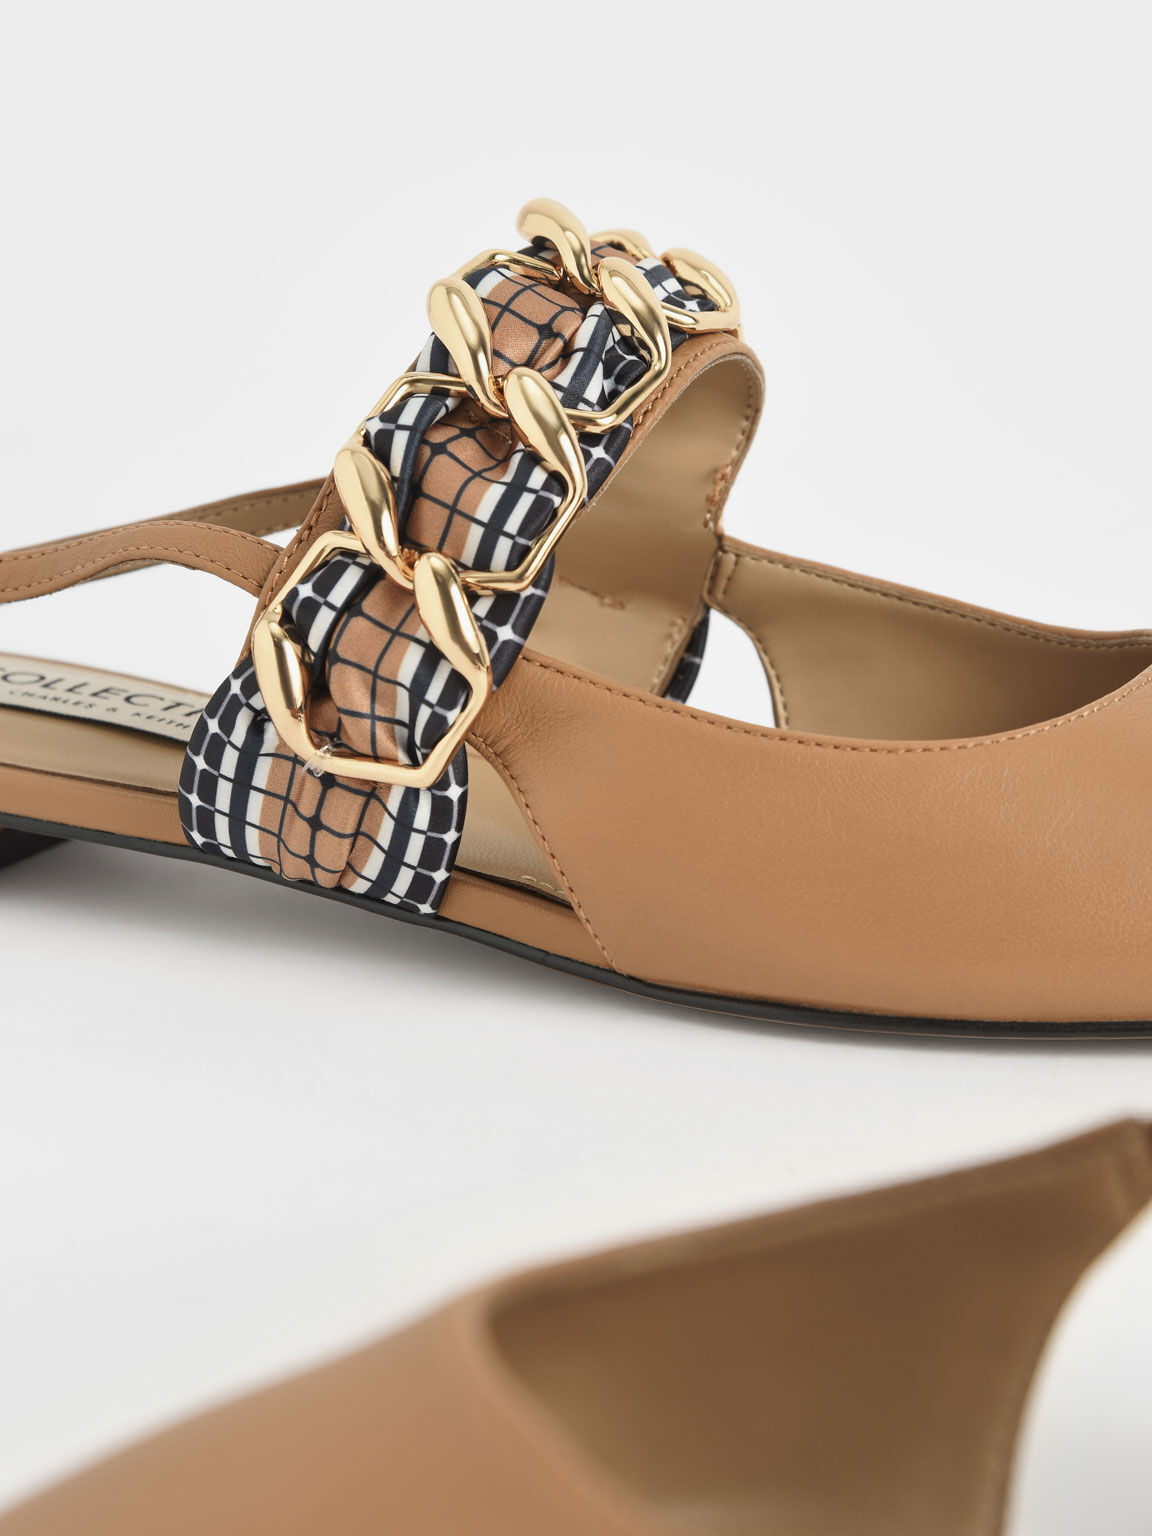 Printed Fabric Scarf Leather Ballet Pumps, Caramel, hi-res